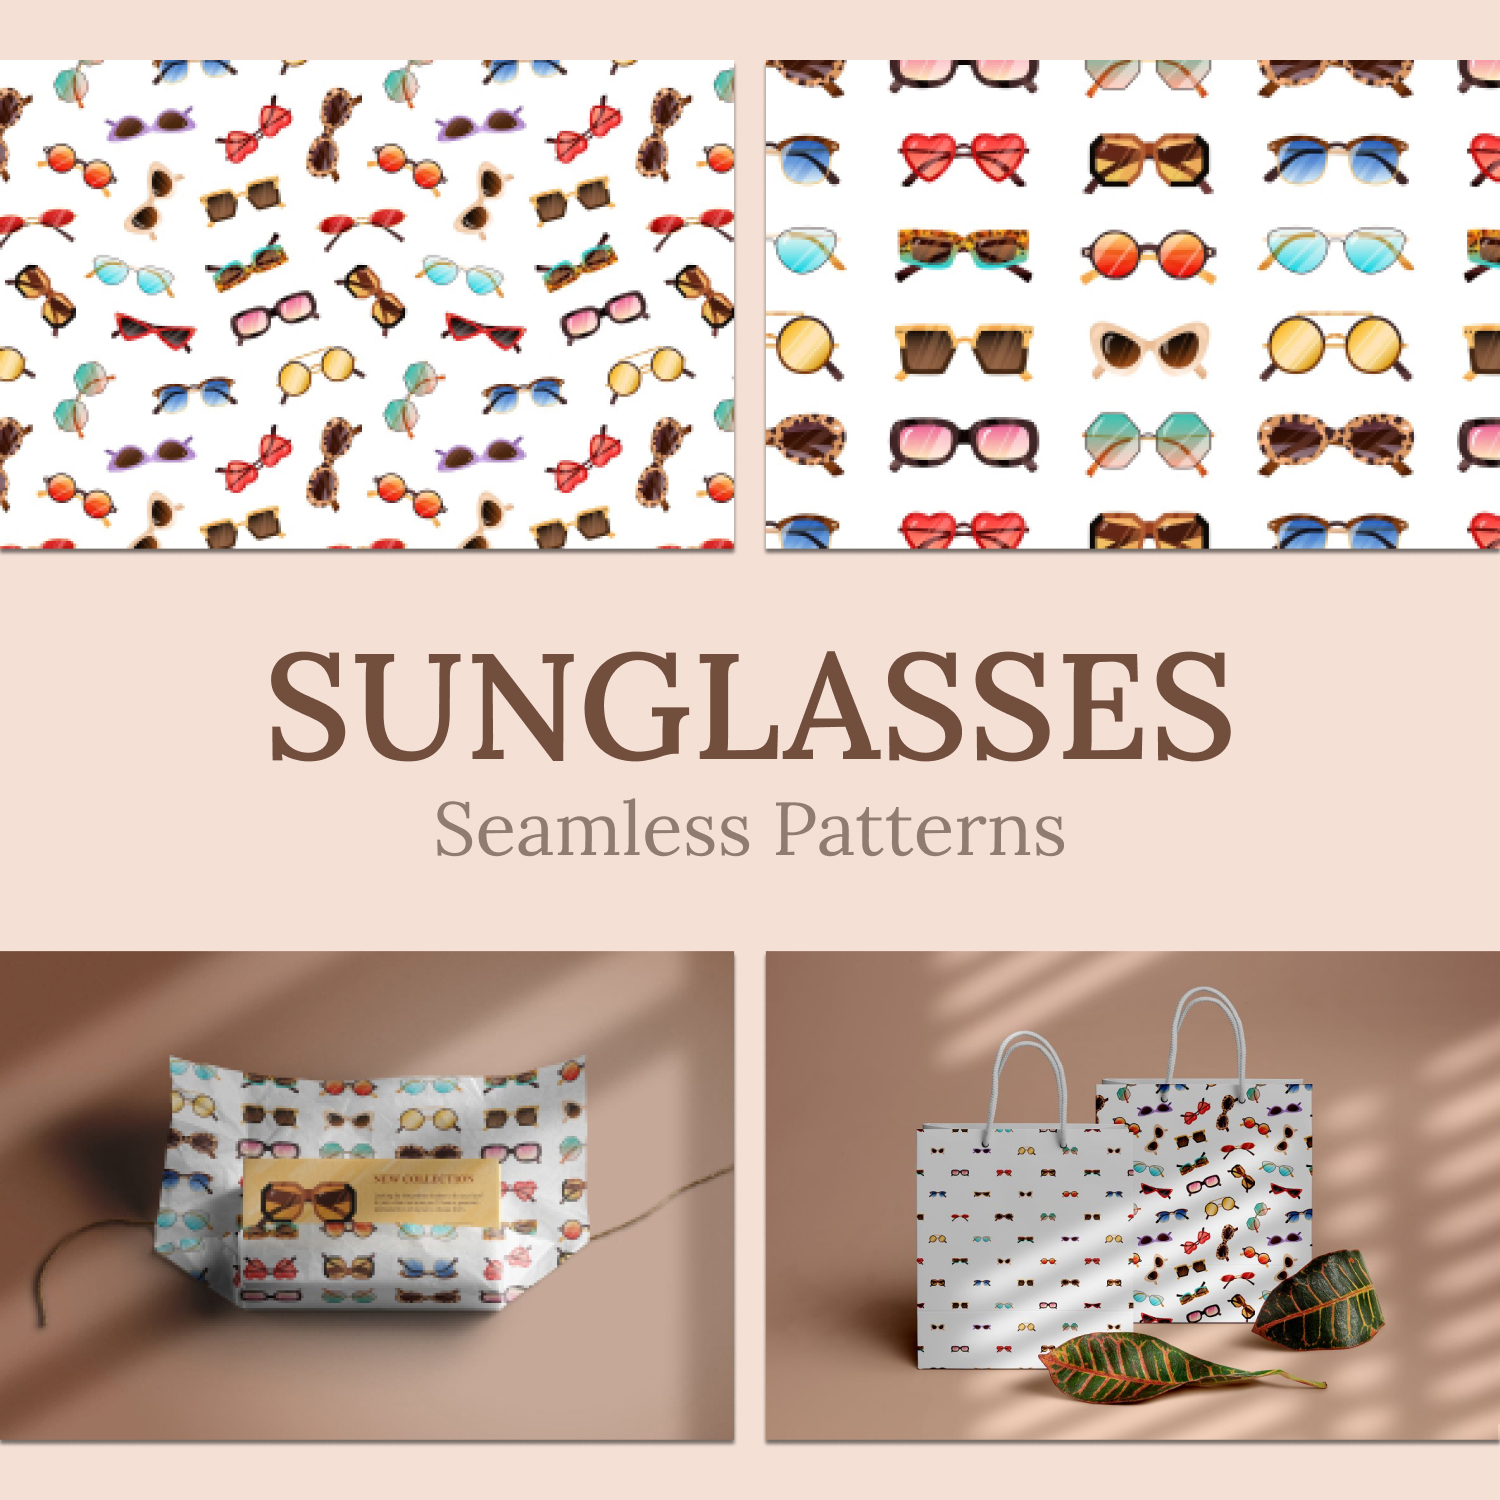 Trendy Sunglasses Seamless Patterns Main Cover.